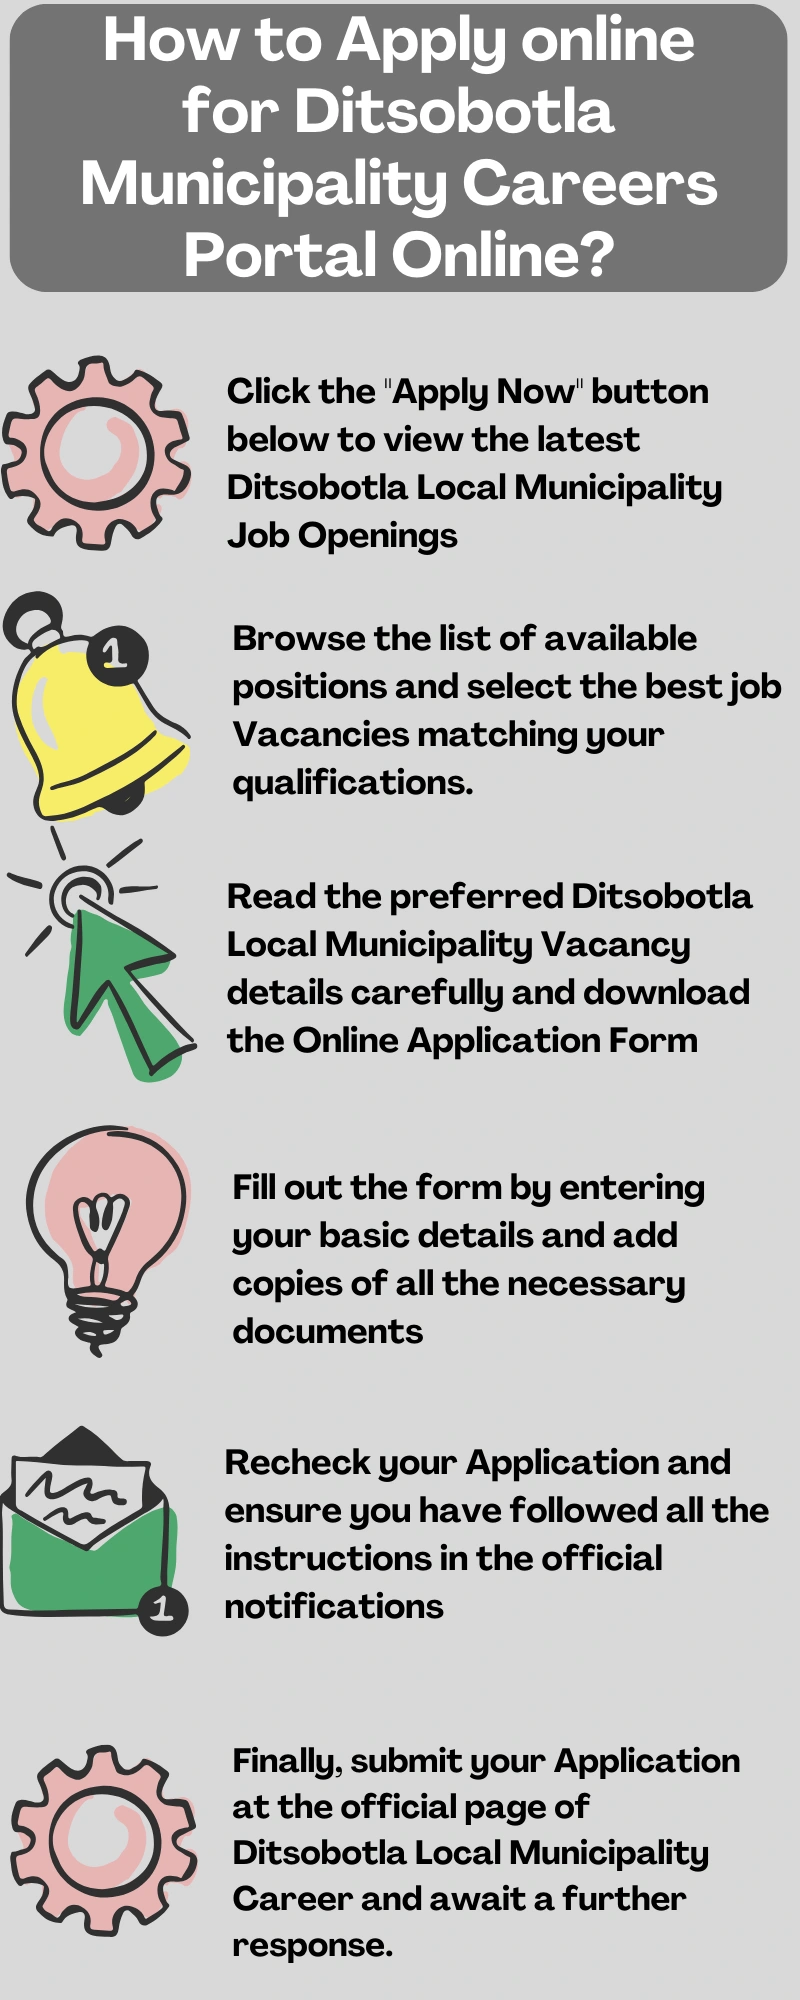 How to Apply online for Ditsobotla Municipality Careers Portal Online?